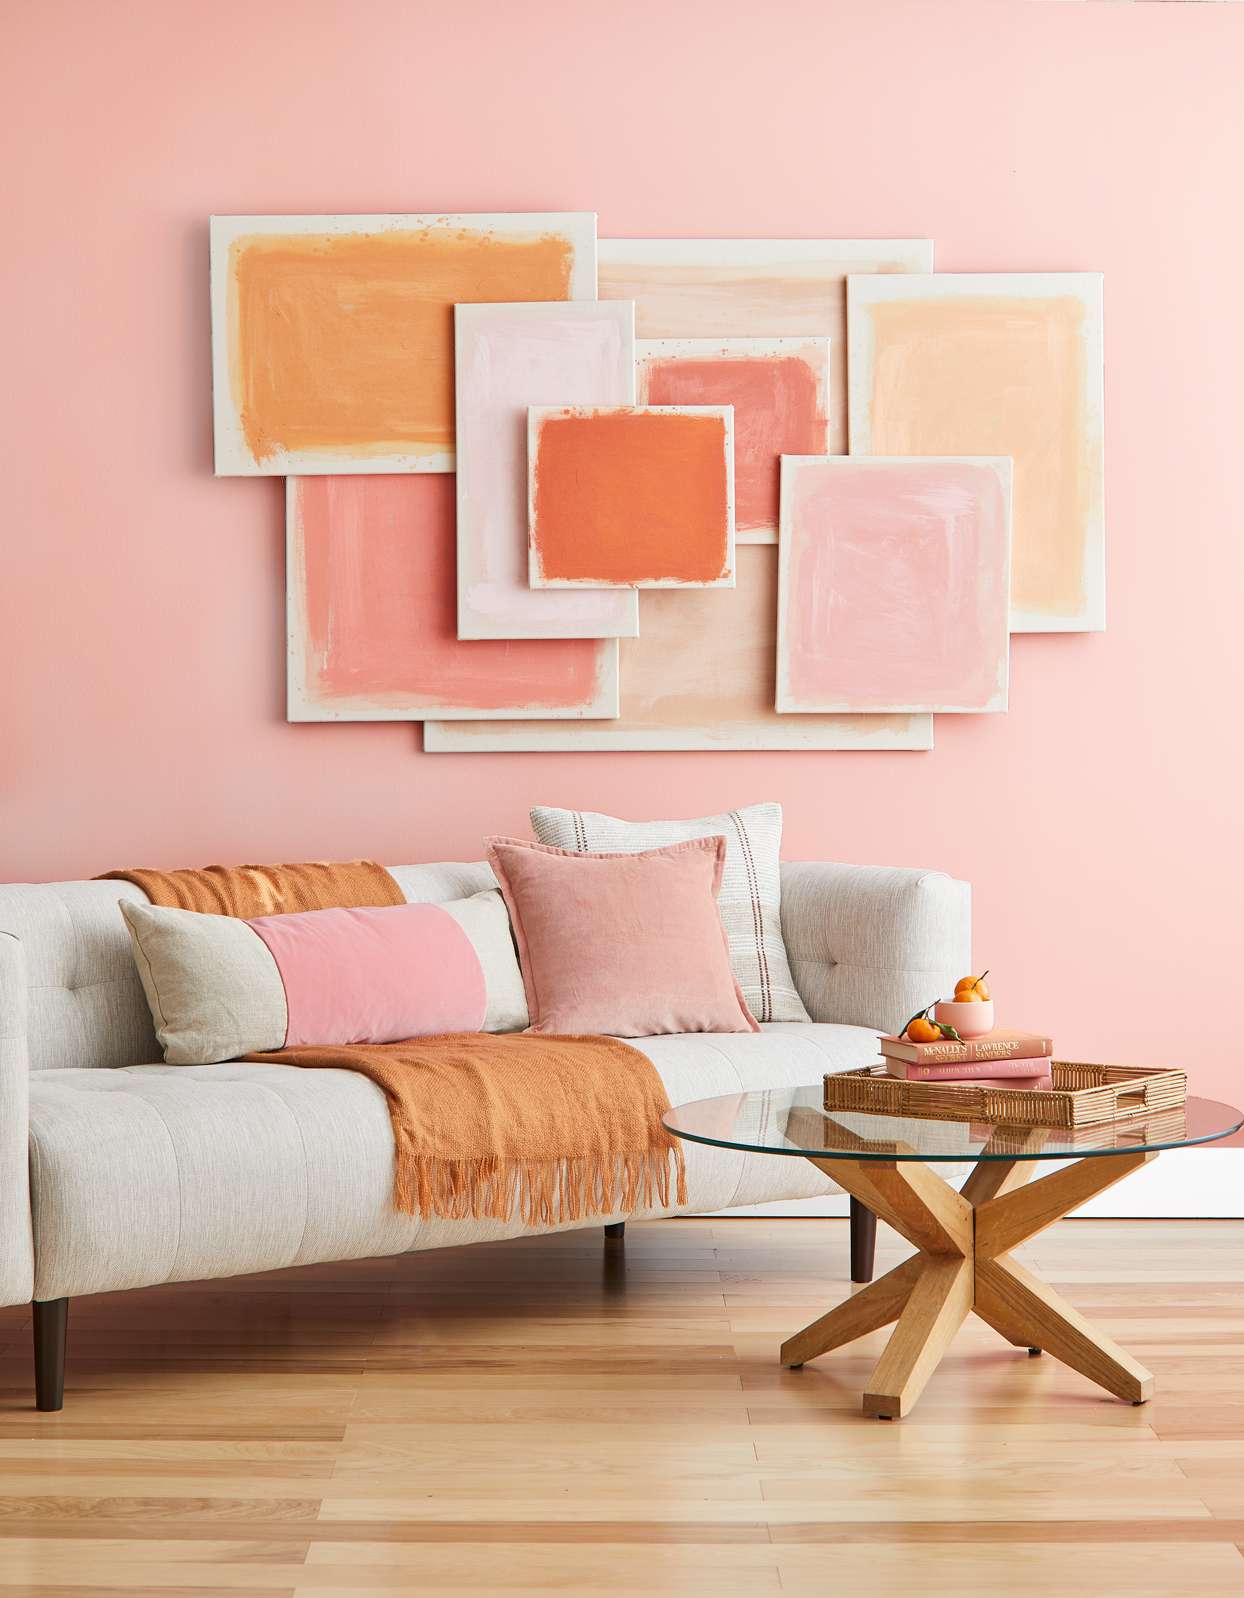 millennial pink wall with sofa, coffee table and pink themed decor and wall hangings